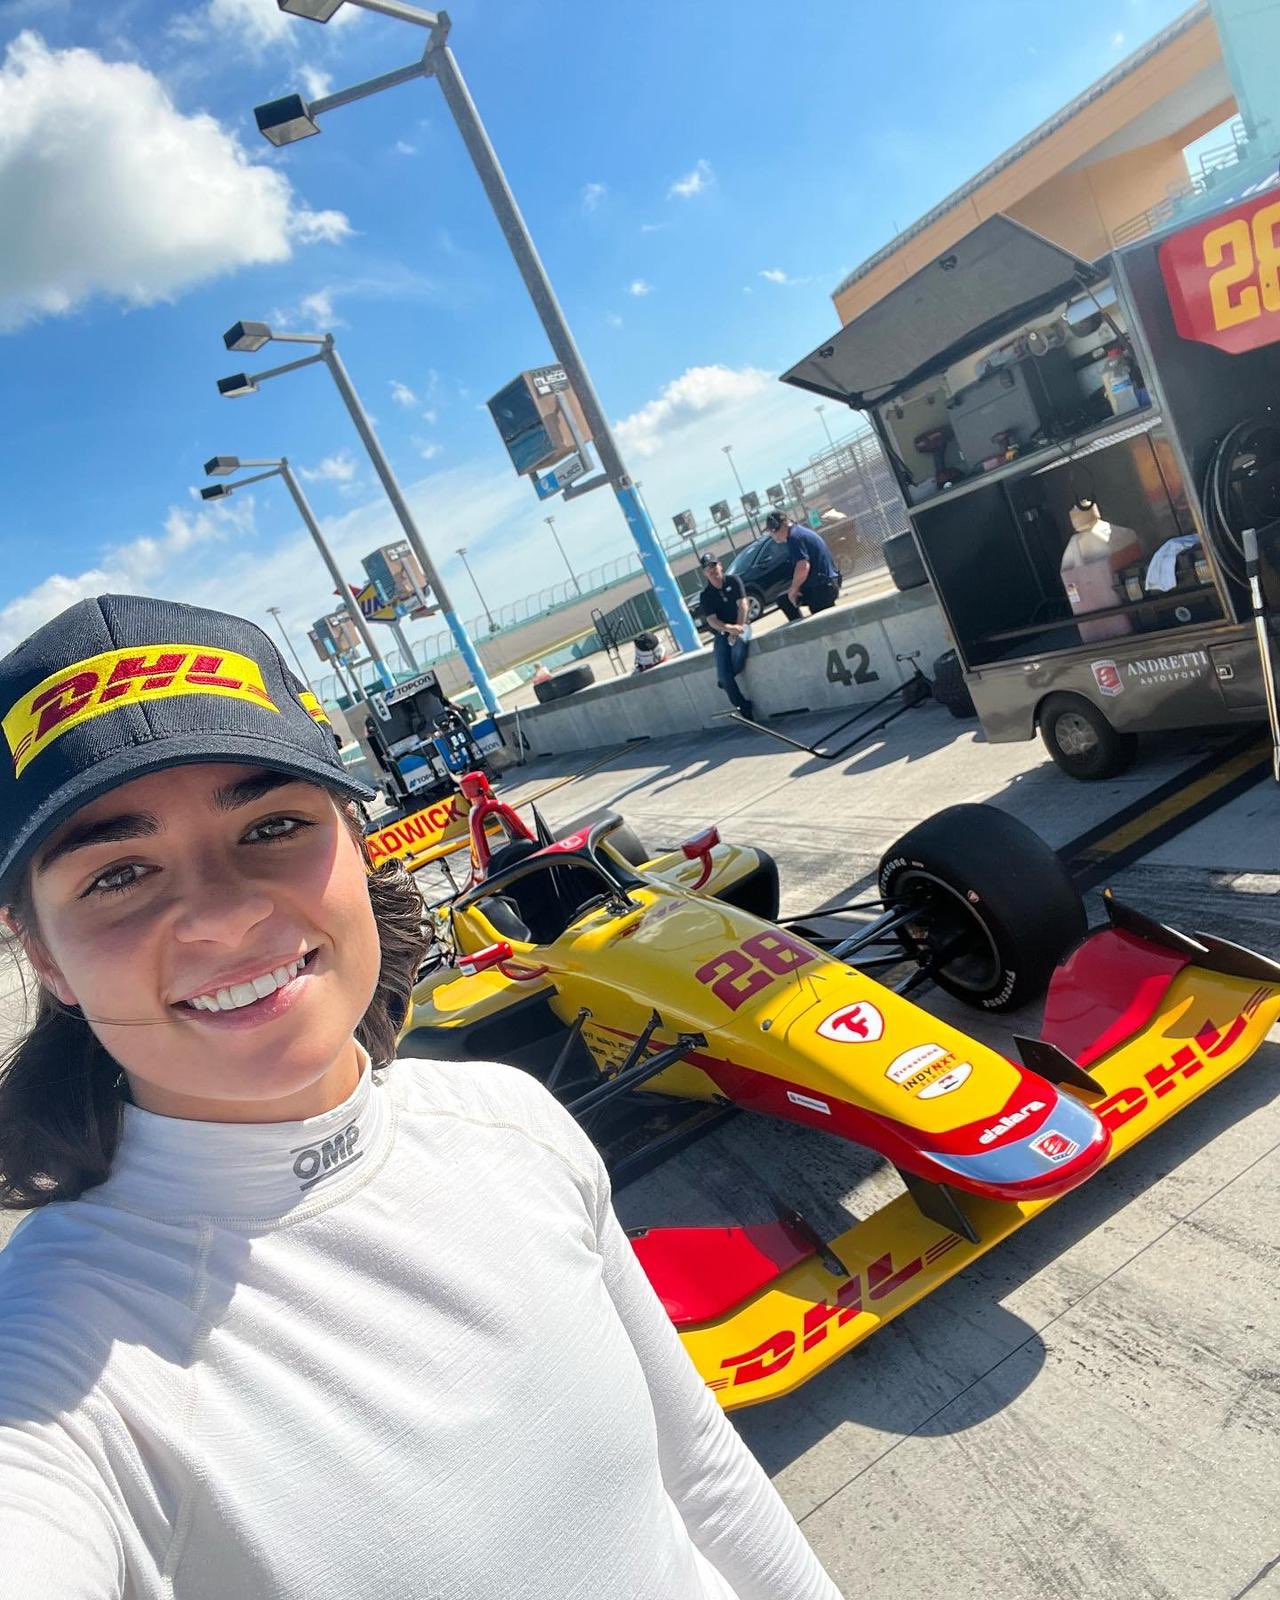 Indy NXT: First look – Chadwick Andretti Autosport DHL livery